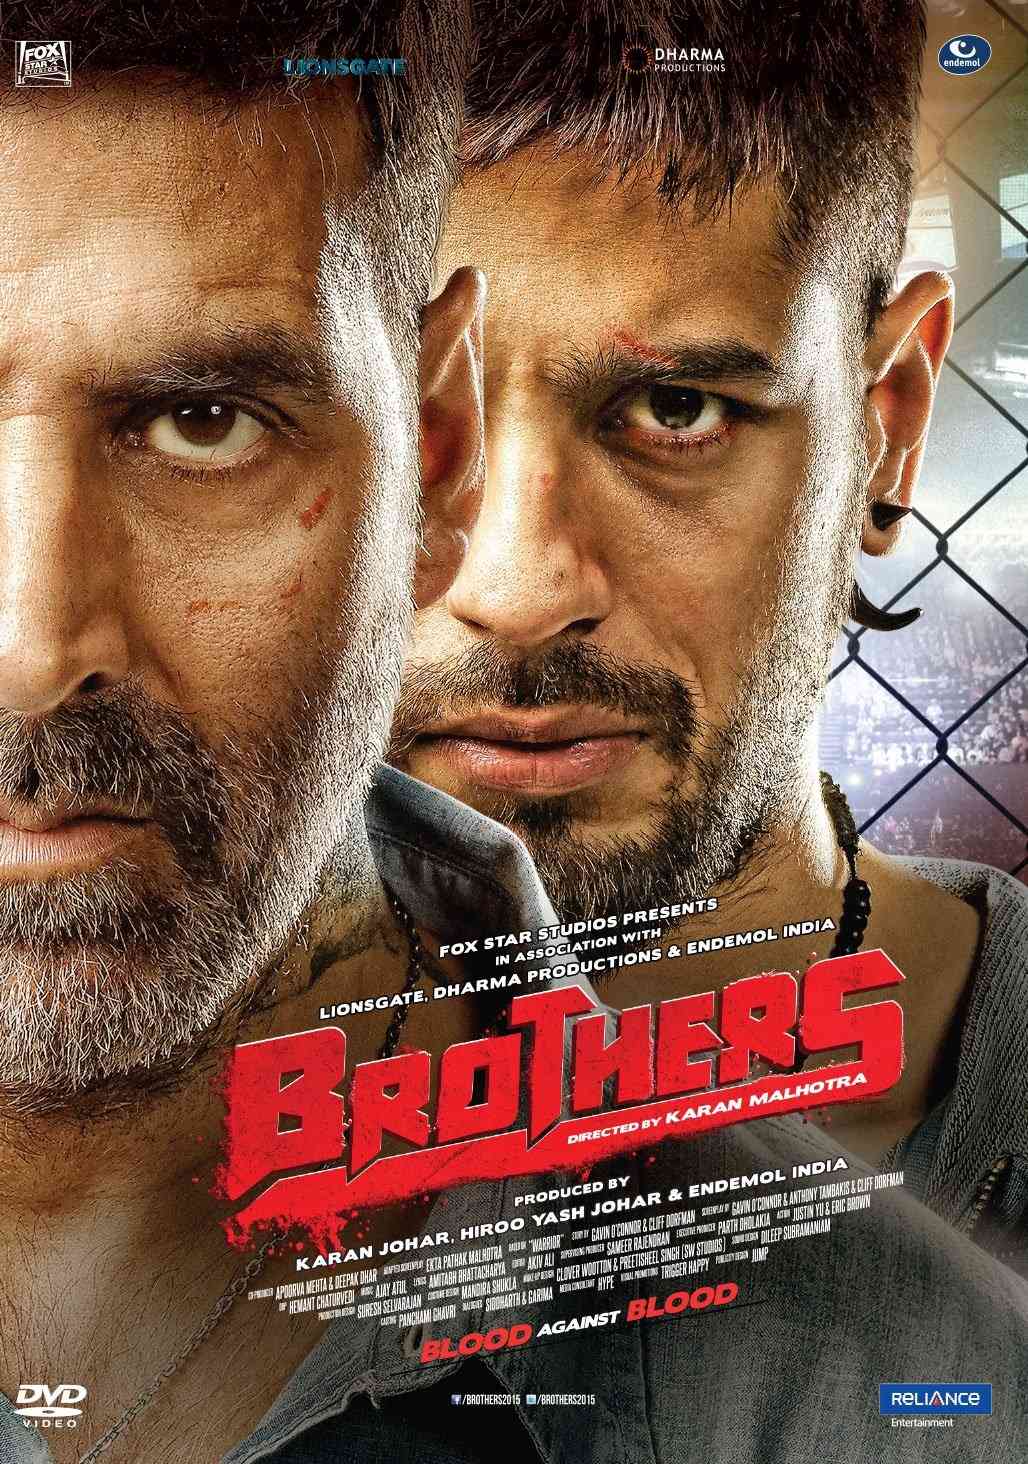 FULL MOVIE: Brothers (2015) [Action]